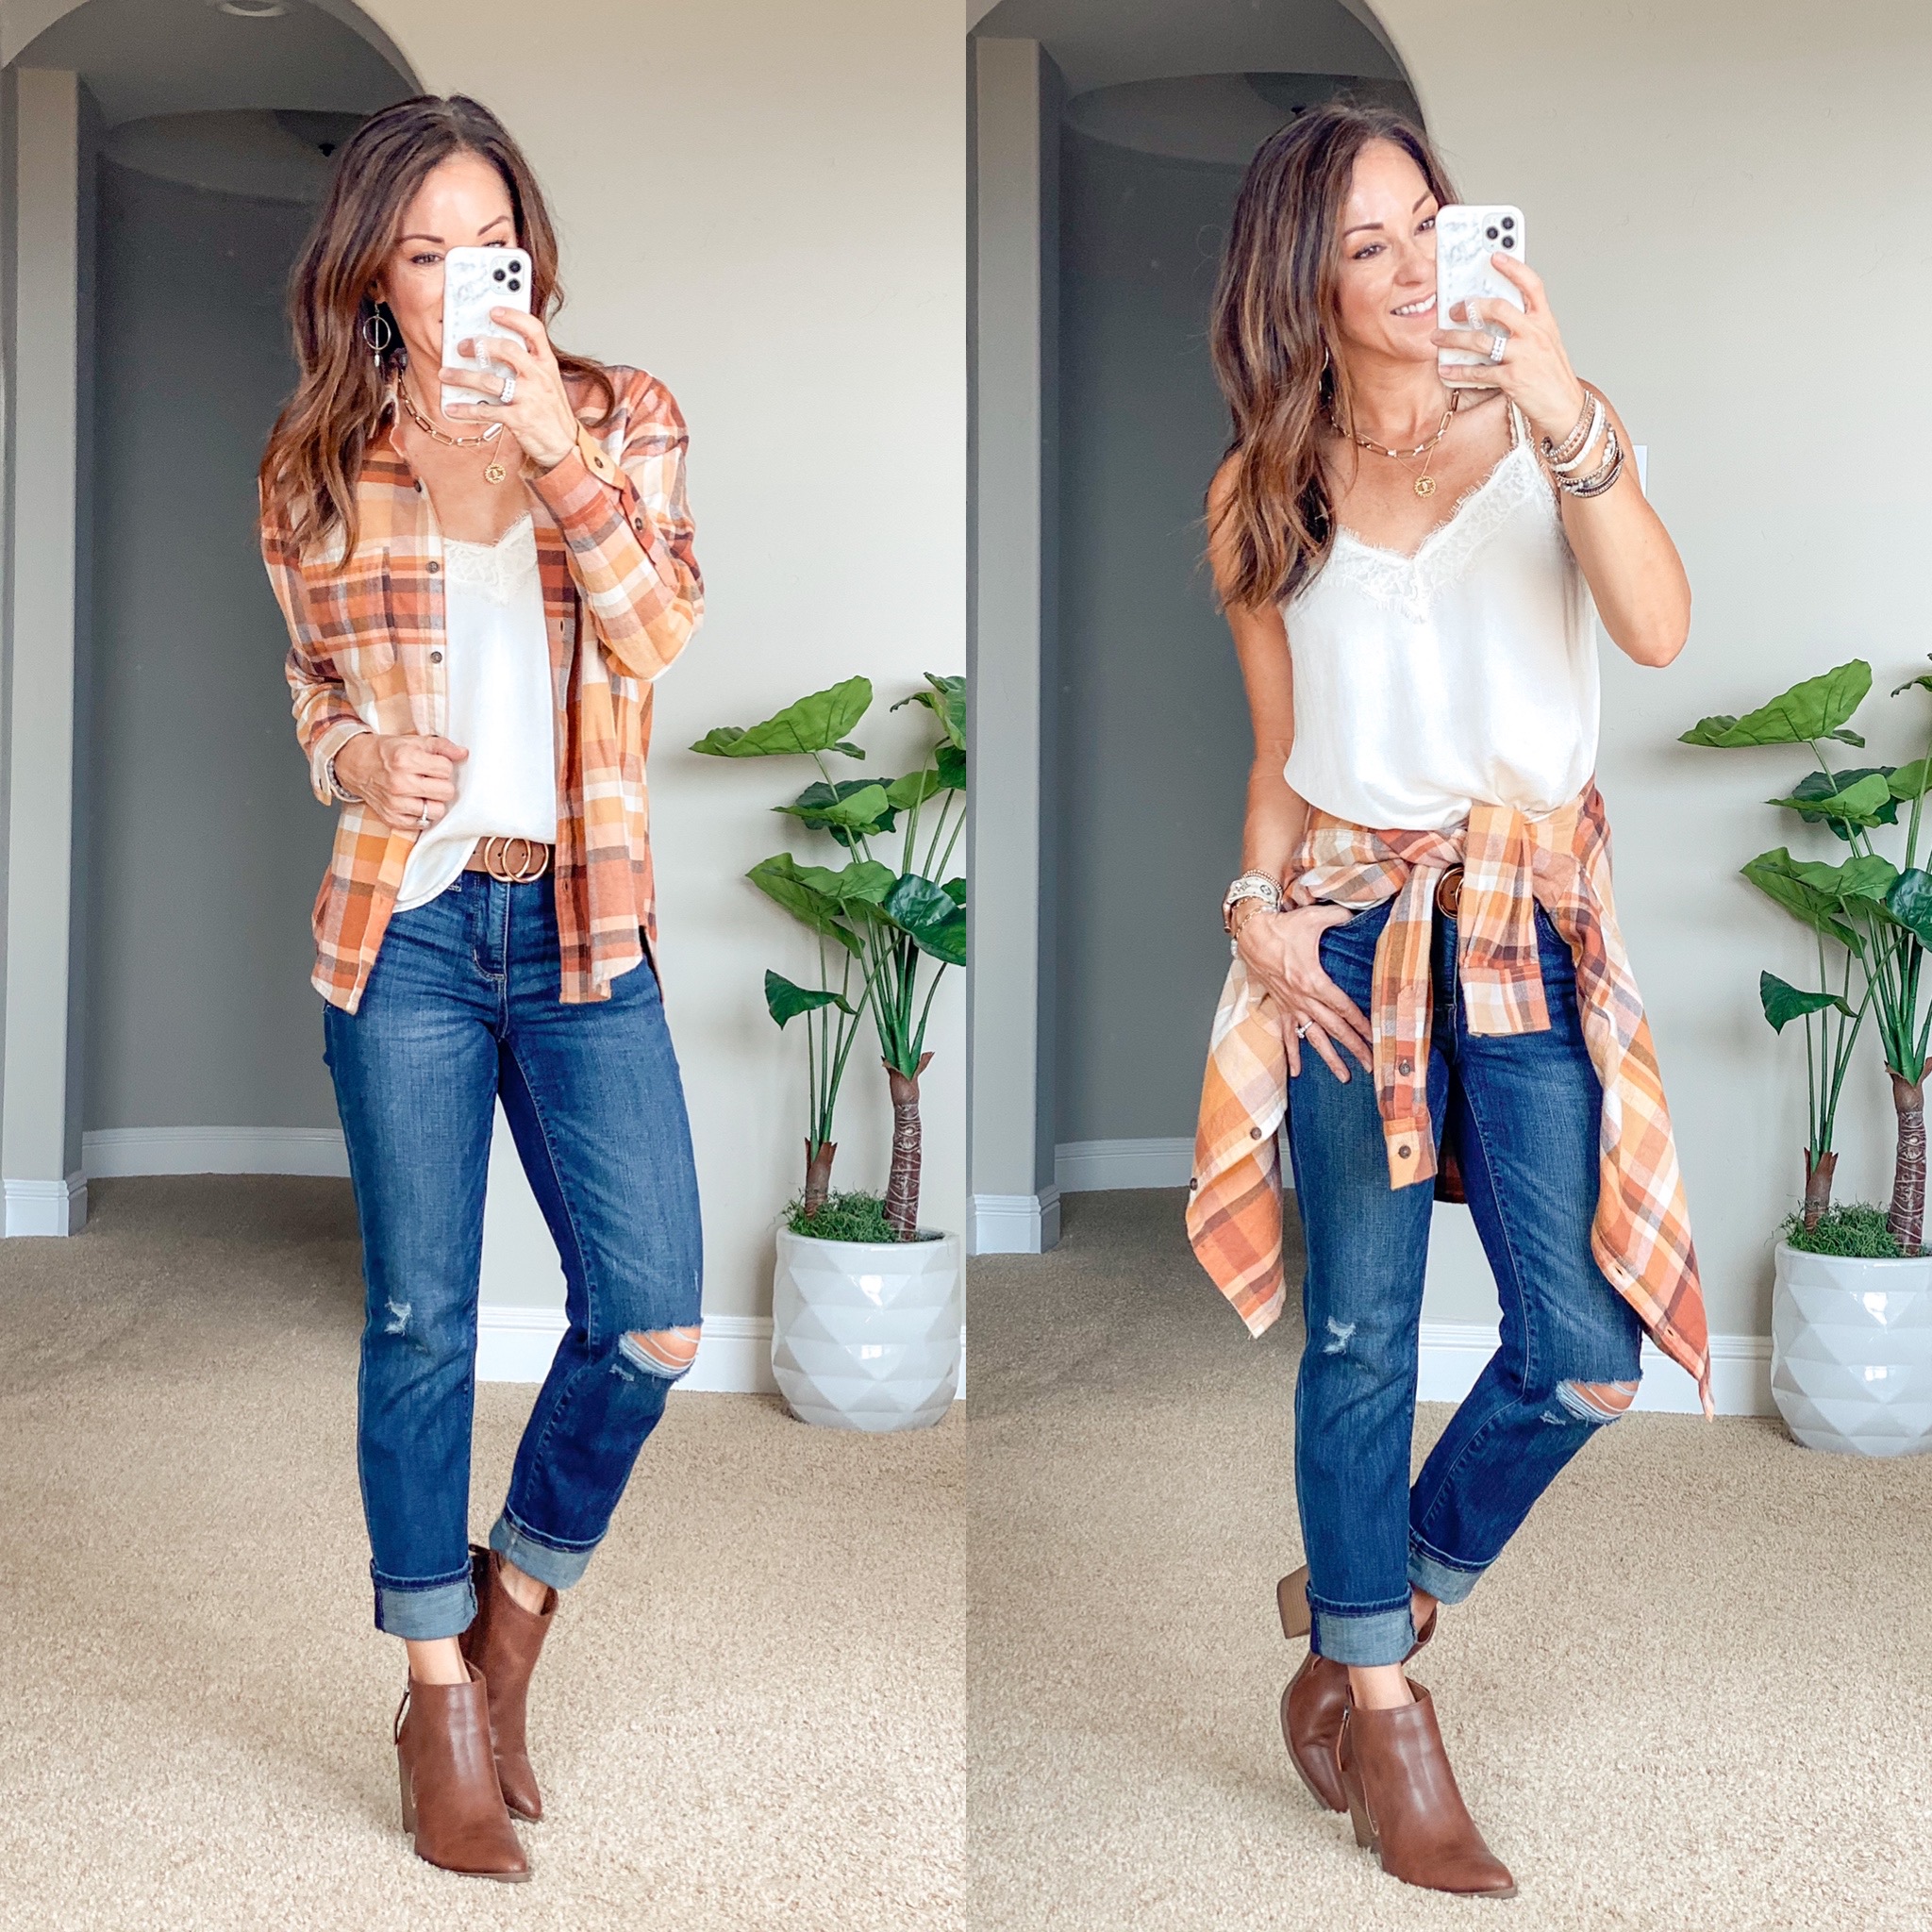 Affordable Target Fall Fashion ~ Over 40 Petite Style - Everyday Holly